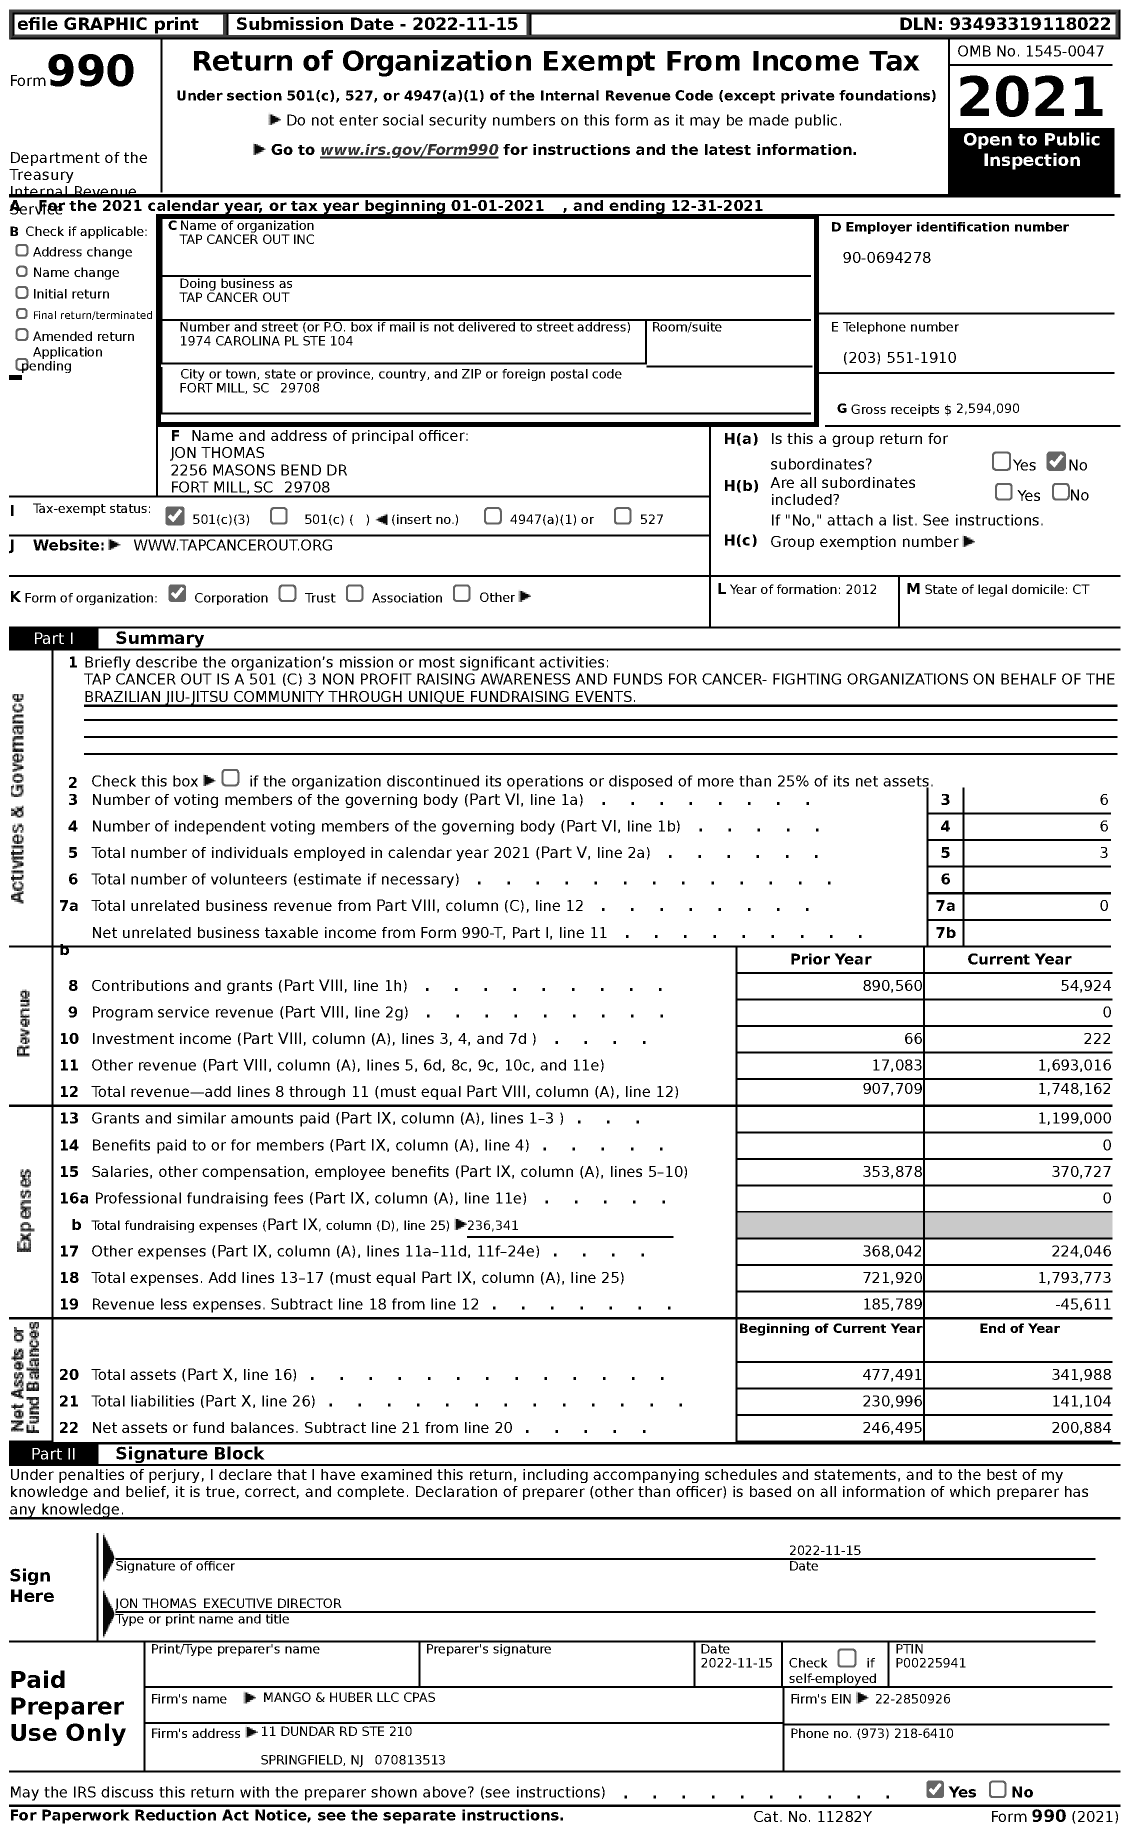 Image of first page of 2021 Form 990 for Tap Cancer Out